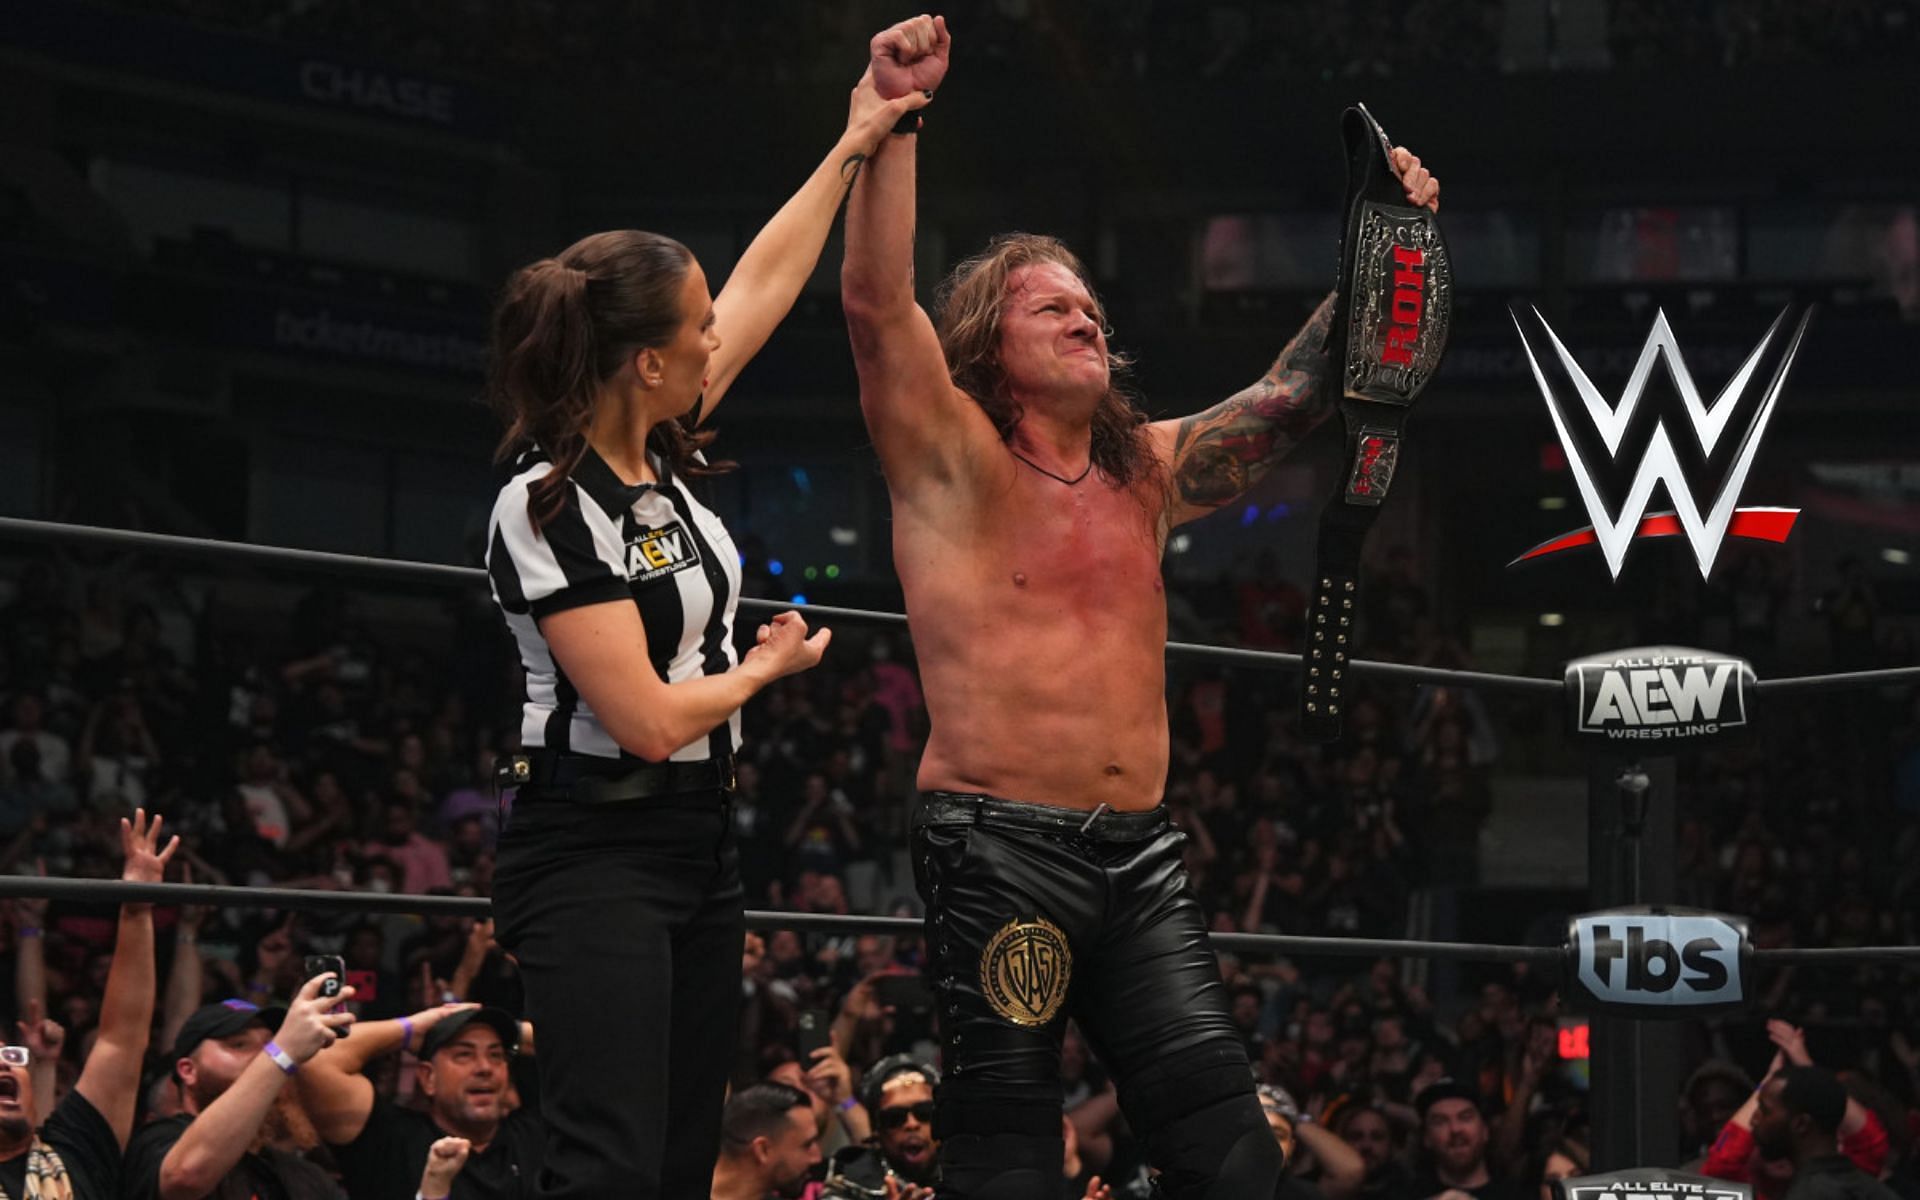 Chris Jericho recently won the Ring of Honor World Championship on last week